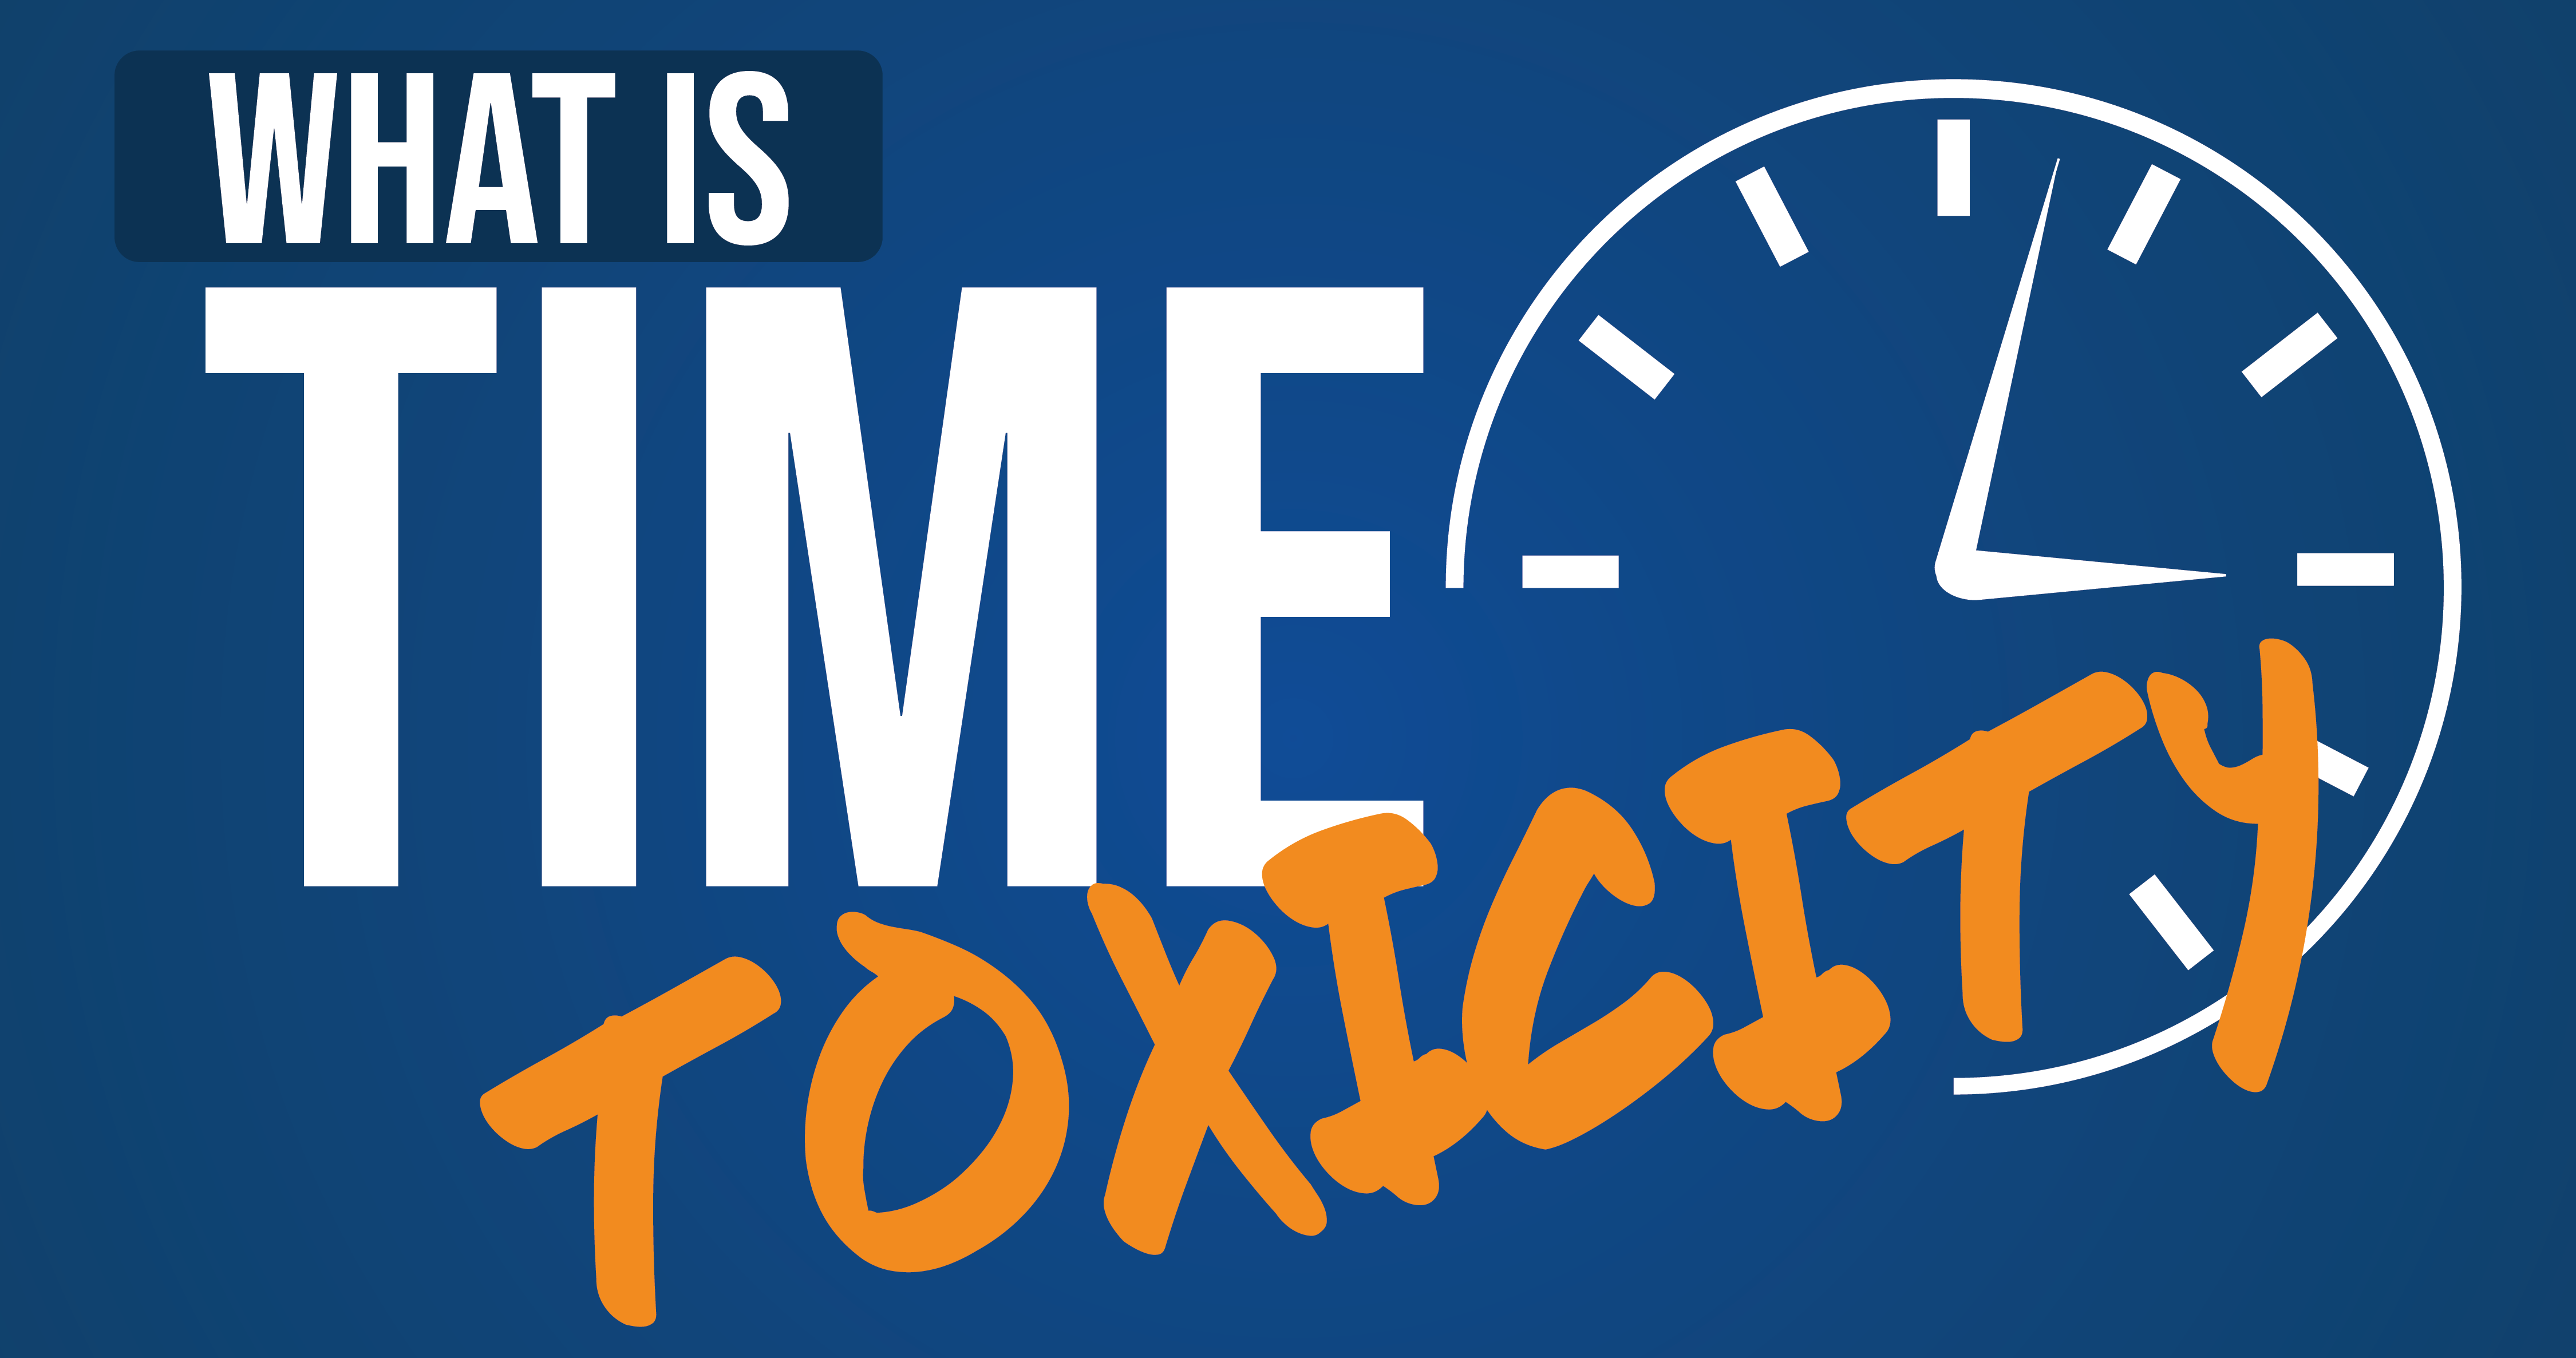 A clock on a blue background with white and orange lettering saying 'What Is Time Toxicity?'